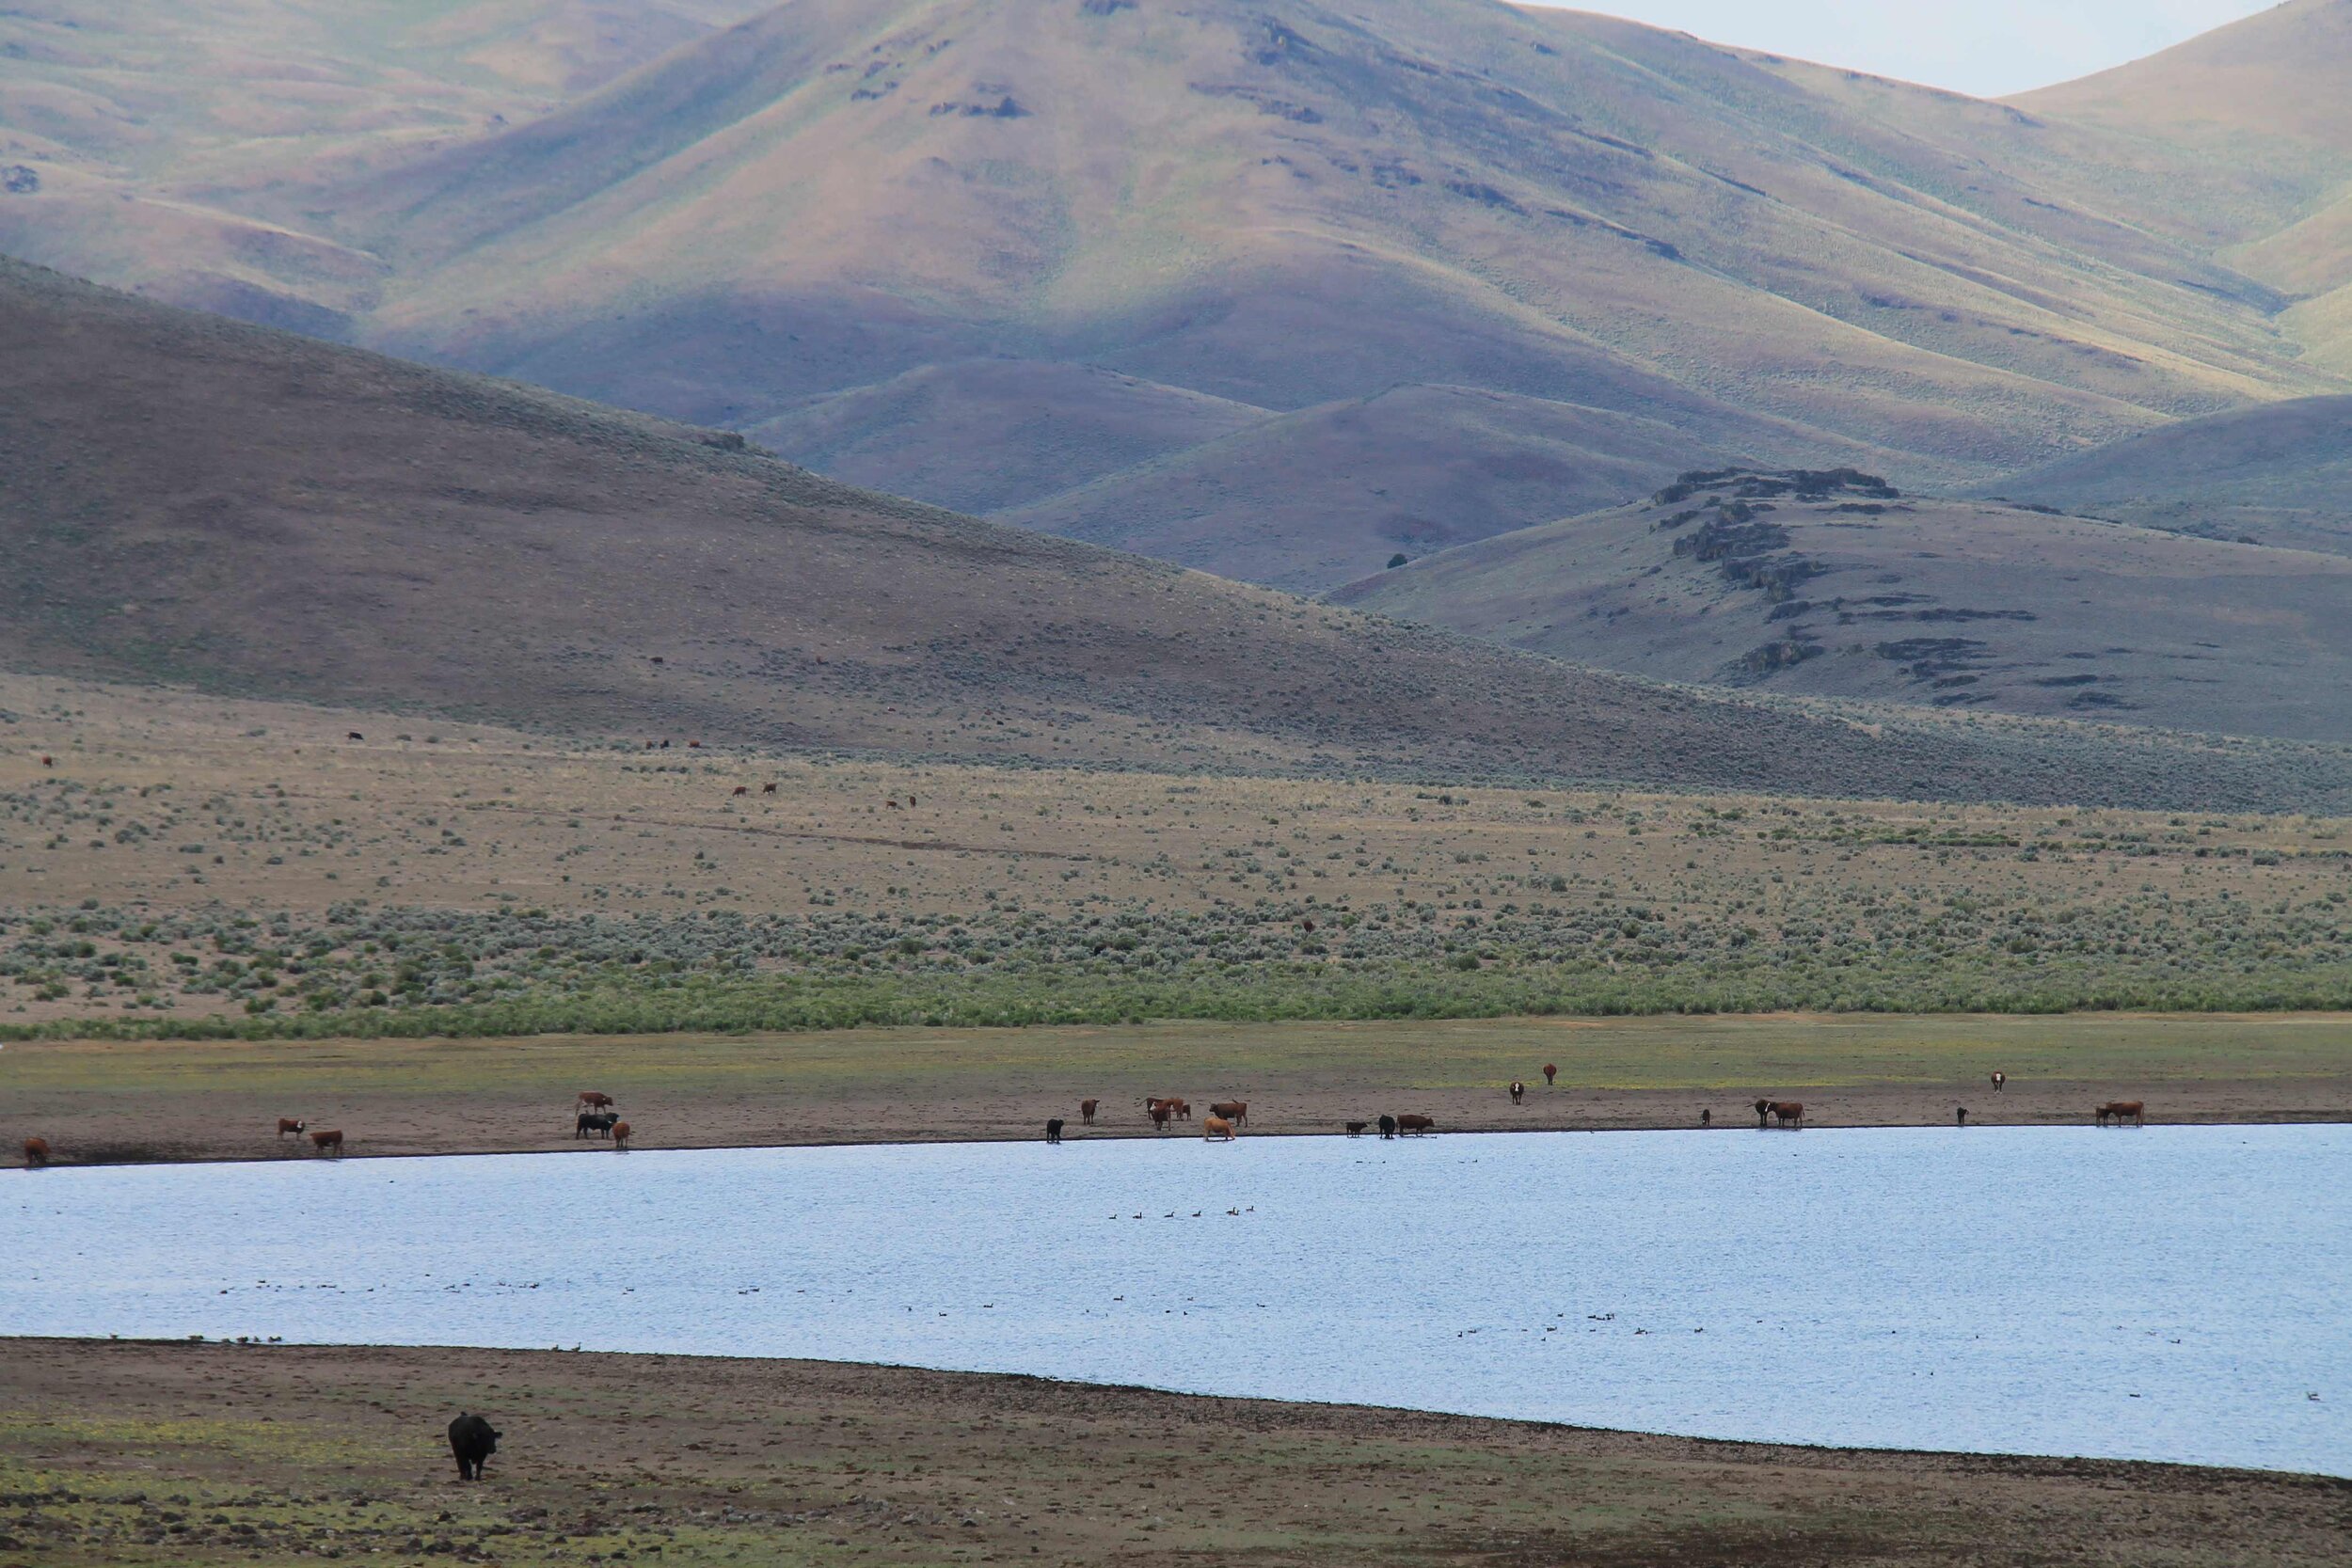  Several dozen cows standing on the shore of a lake at the base of mountains.  